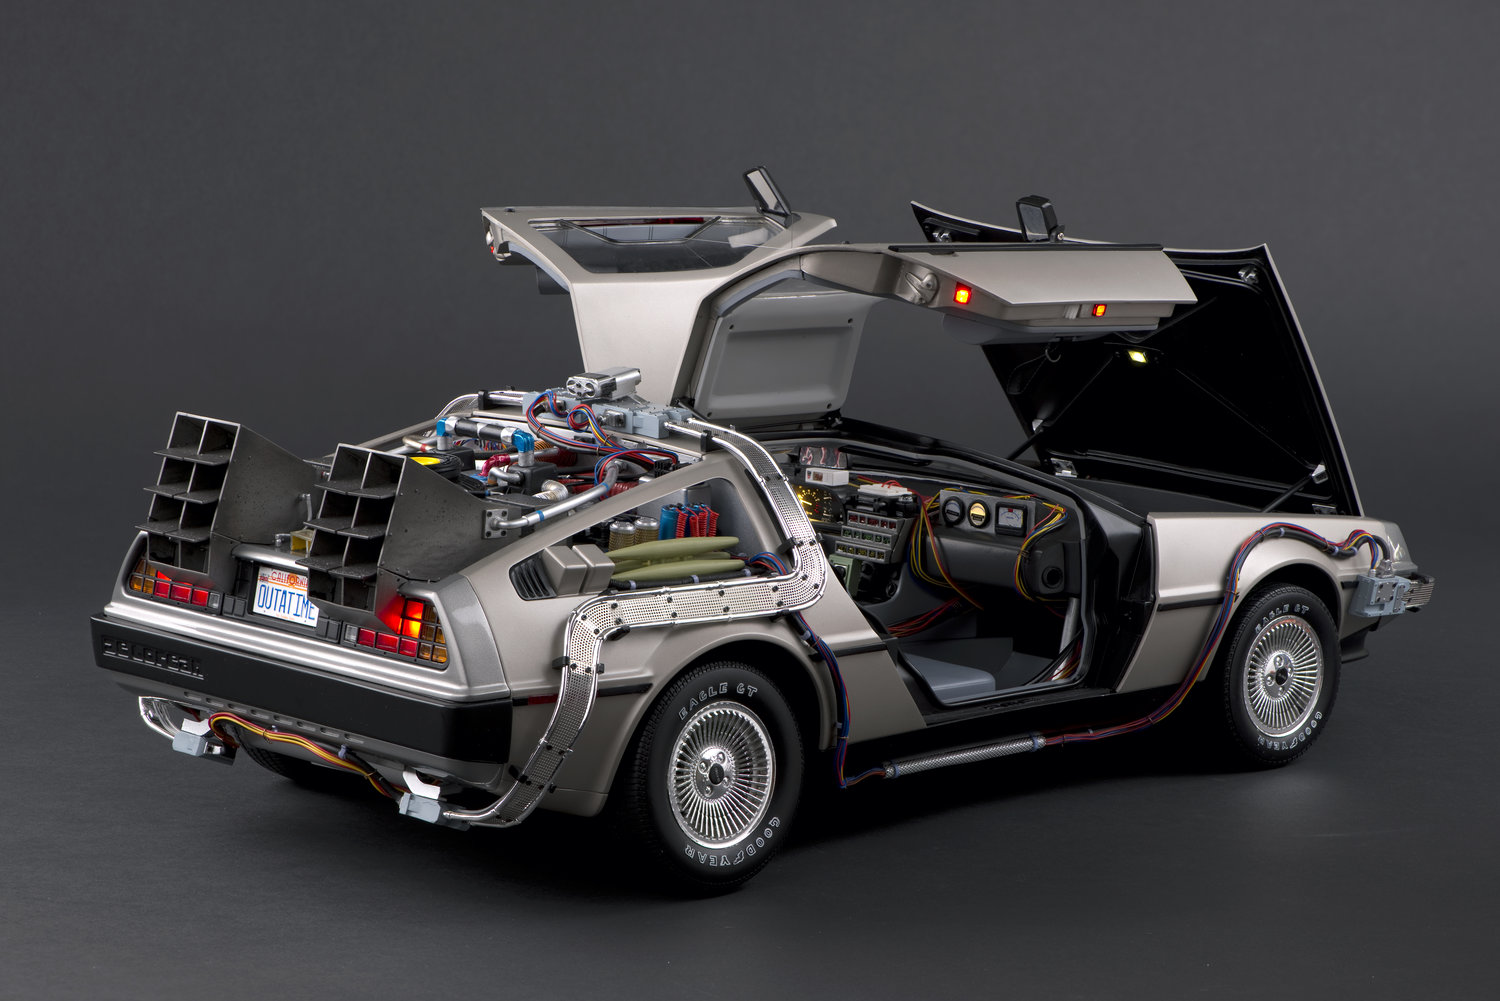 The stainless steel 1981 DeLorean DMC-12 with its doors open.